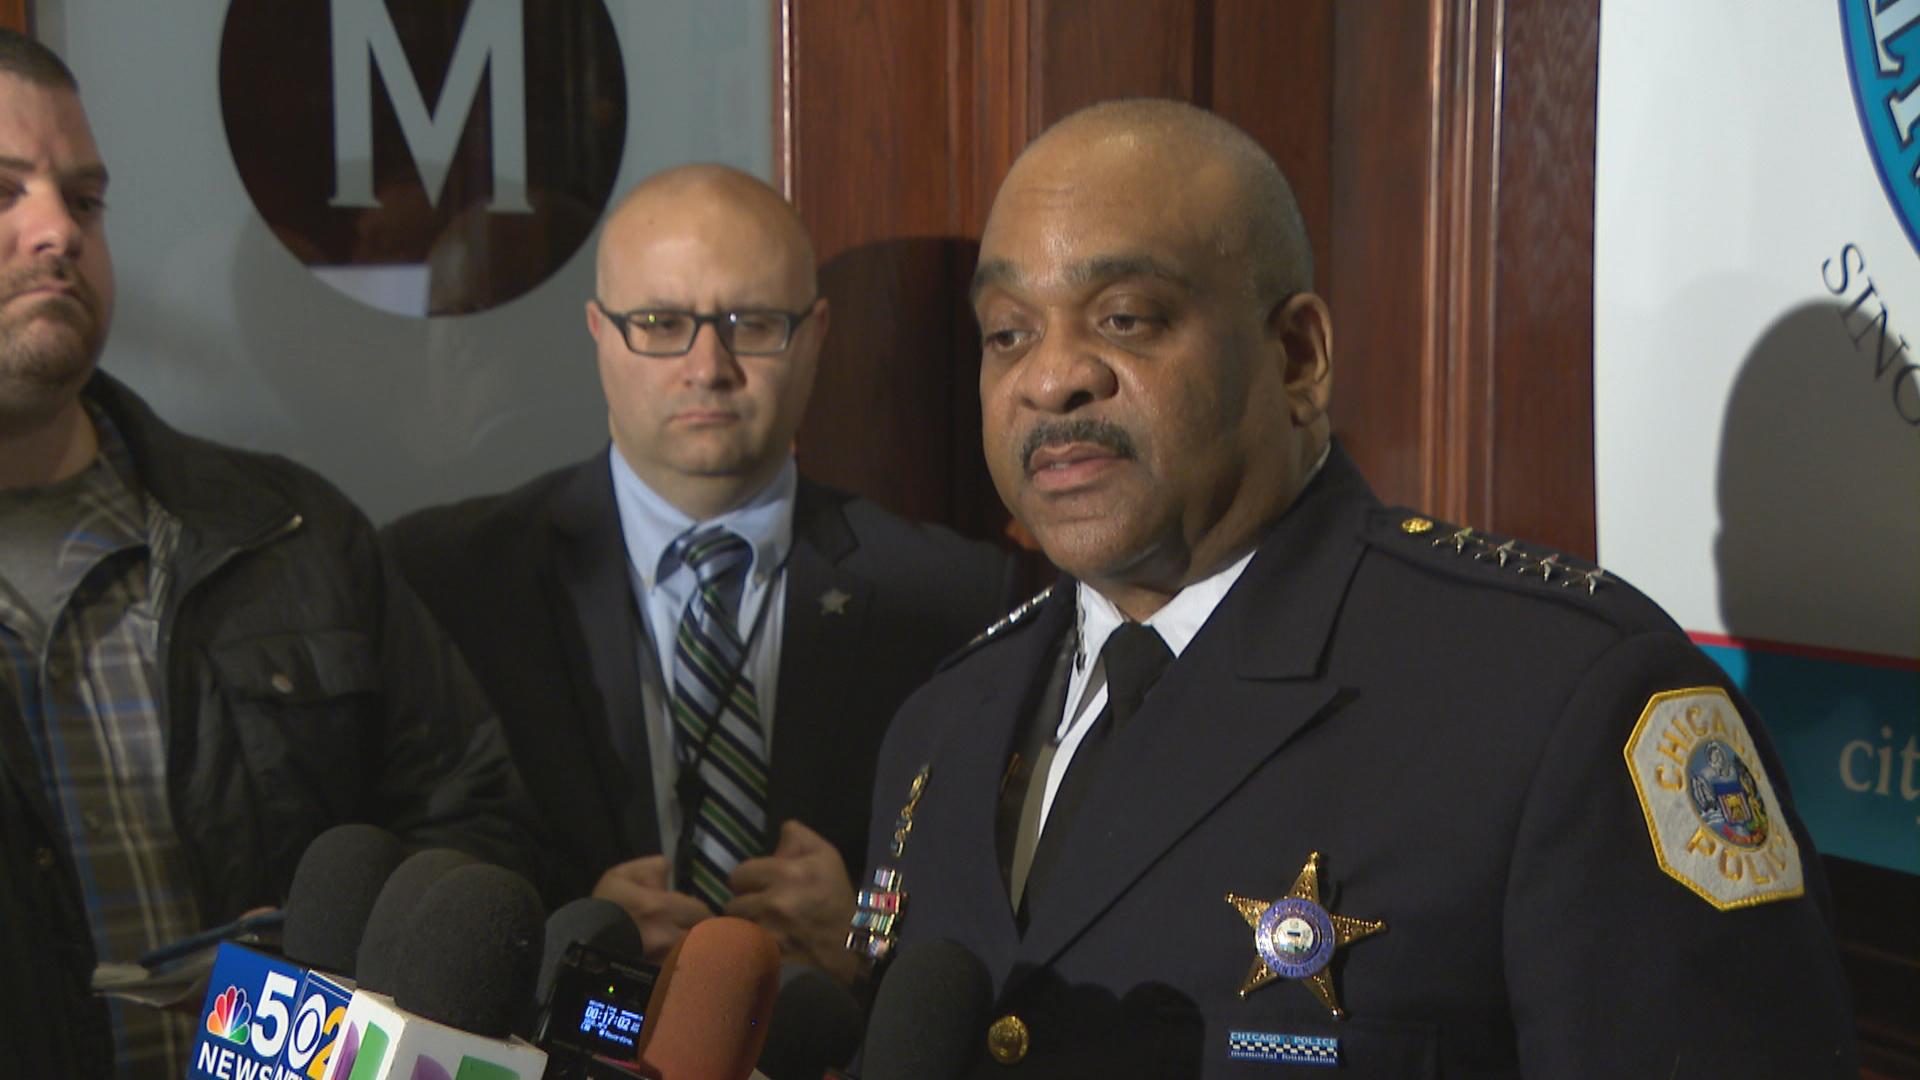 “We recognize that some people may be misidentified,” Chicago Police Superintendent Eddie Johnson said.